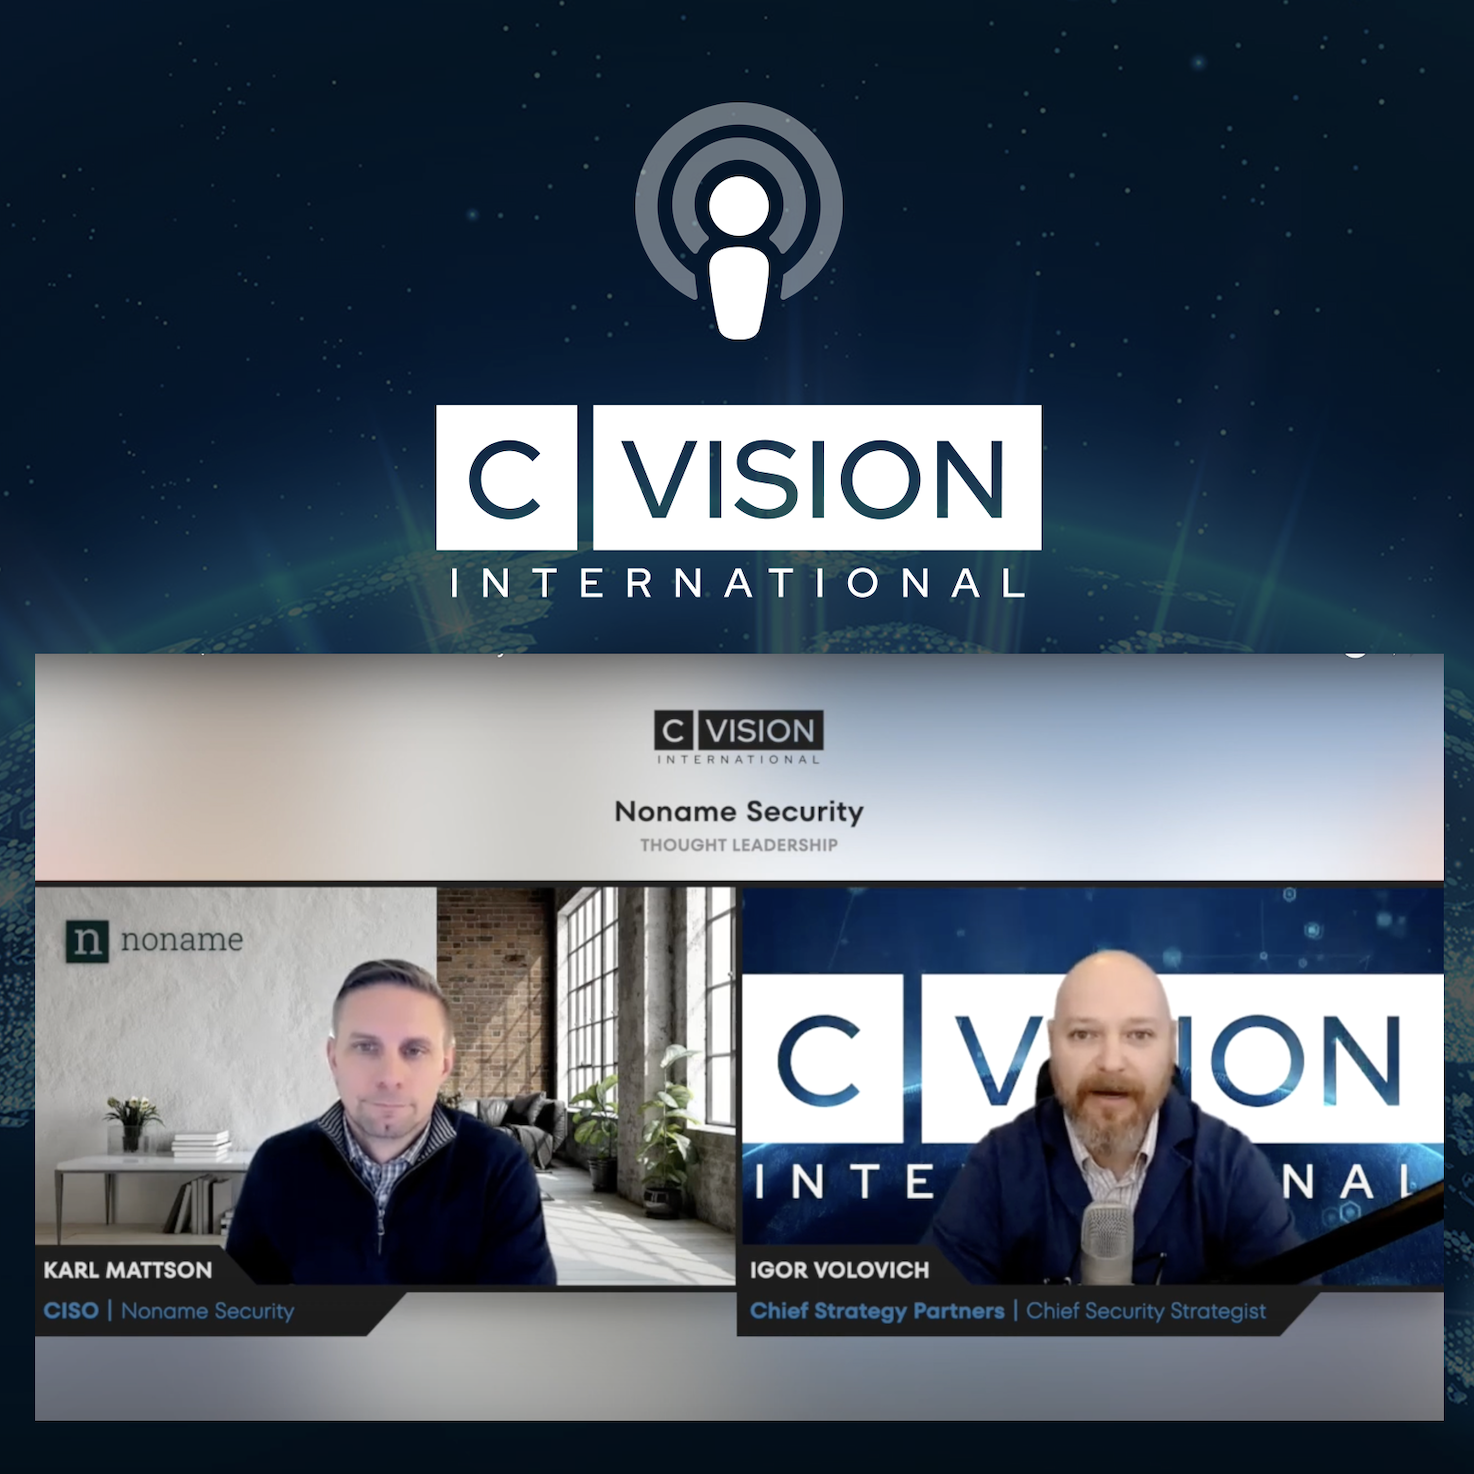 Noname Security Thought Leadership featuring Karl Mattson, CISO, Noname Security & Igor Volovich, Chief Security Strategist at Cyber Strategy Partners